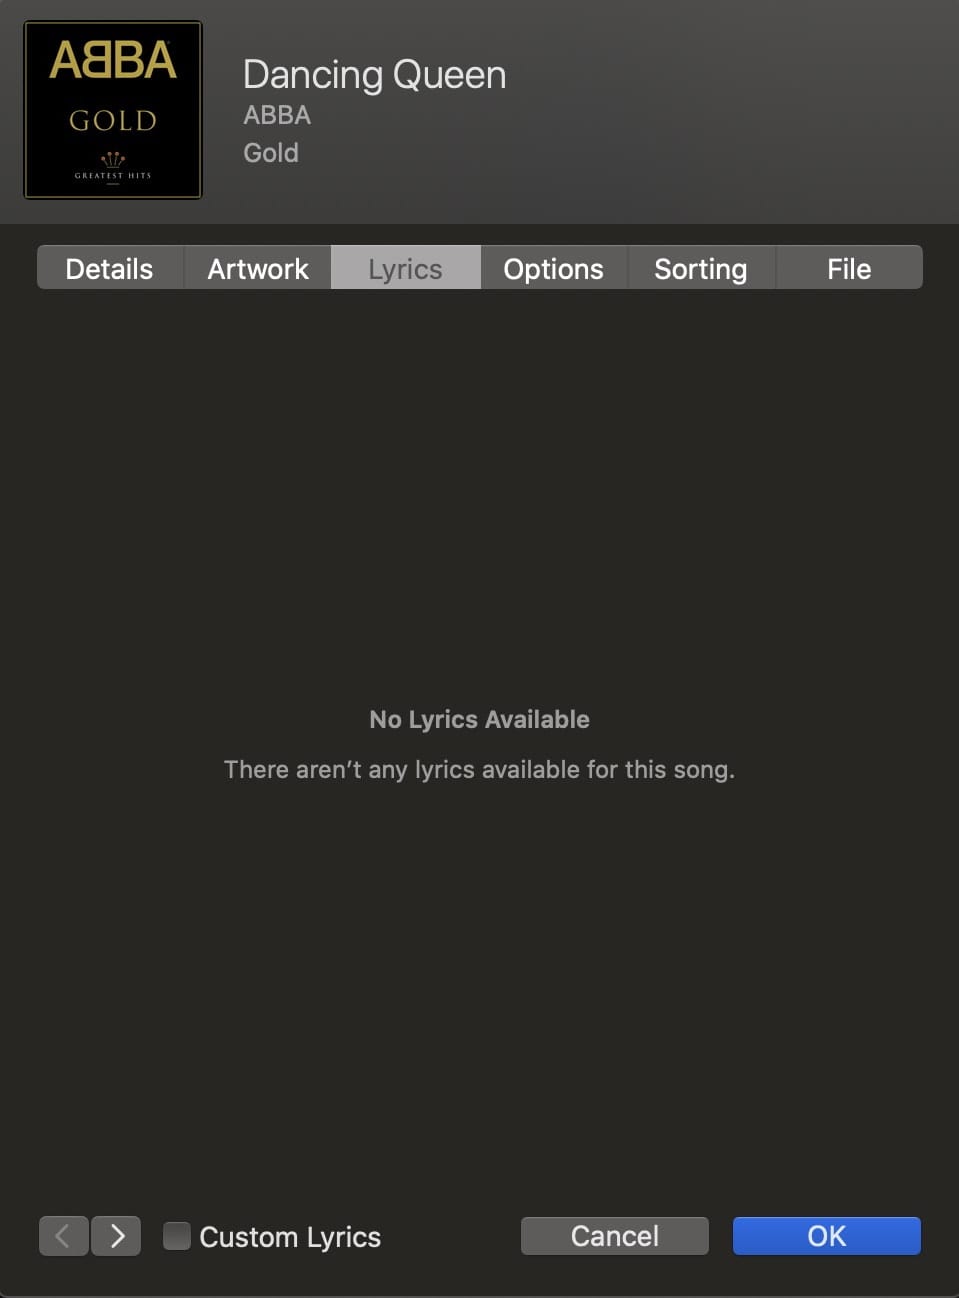 Get info screen from apple music app showing no lyrics for dancing queen by ABBA